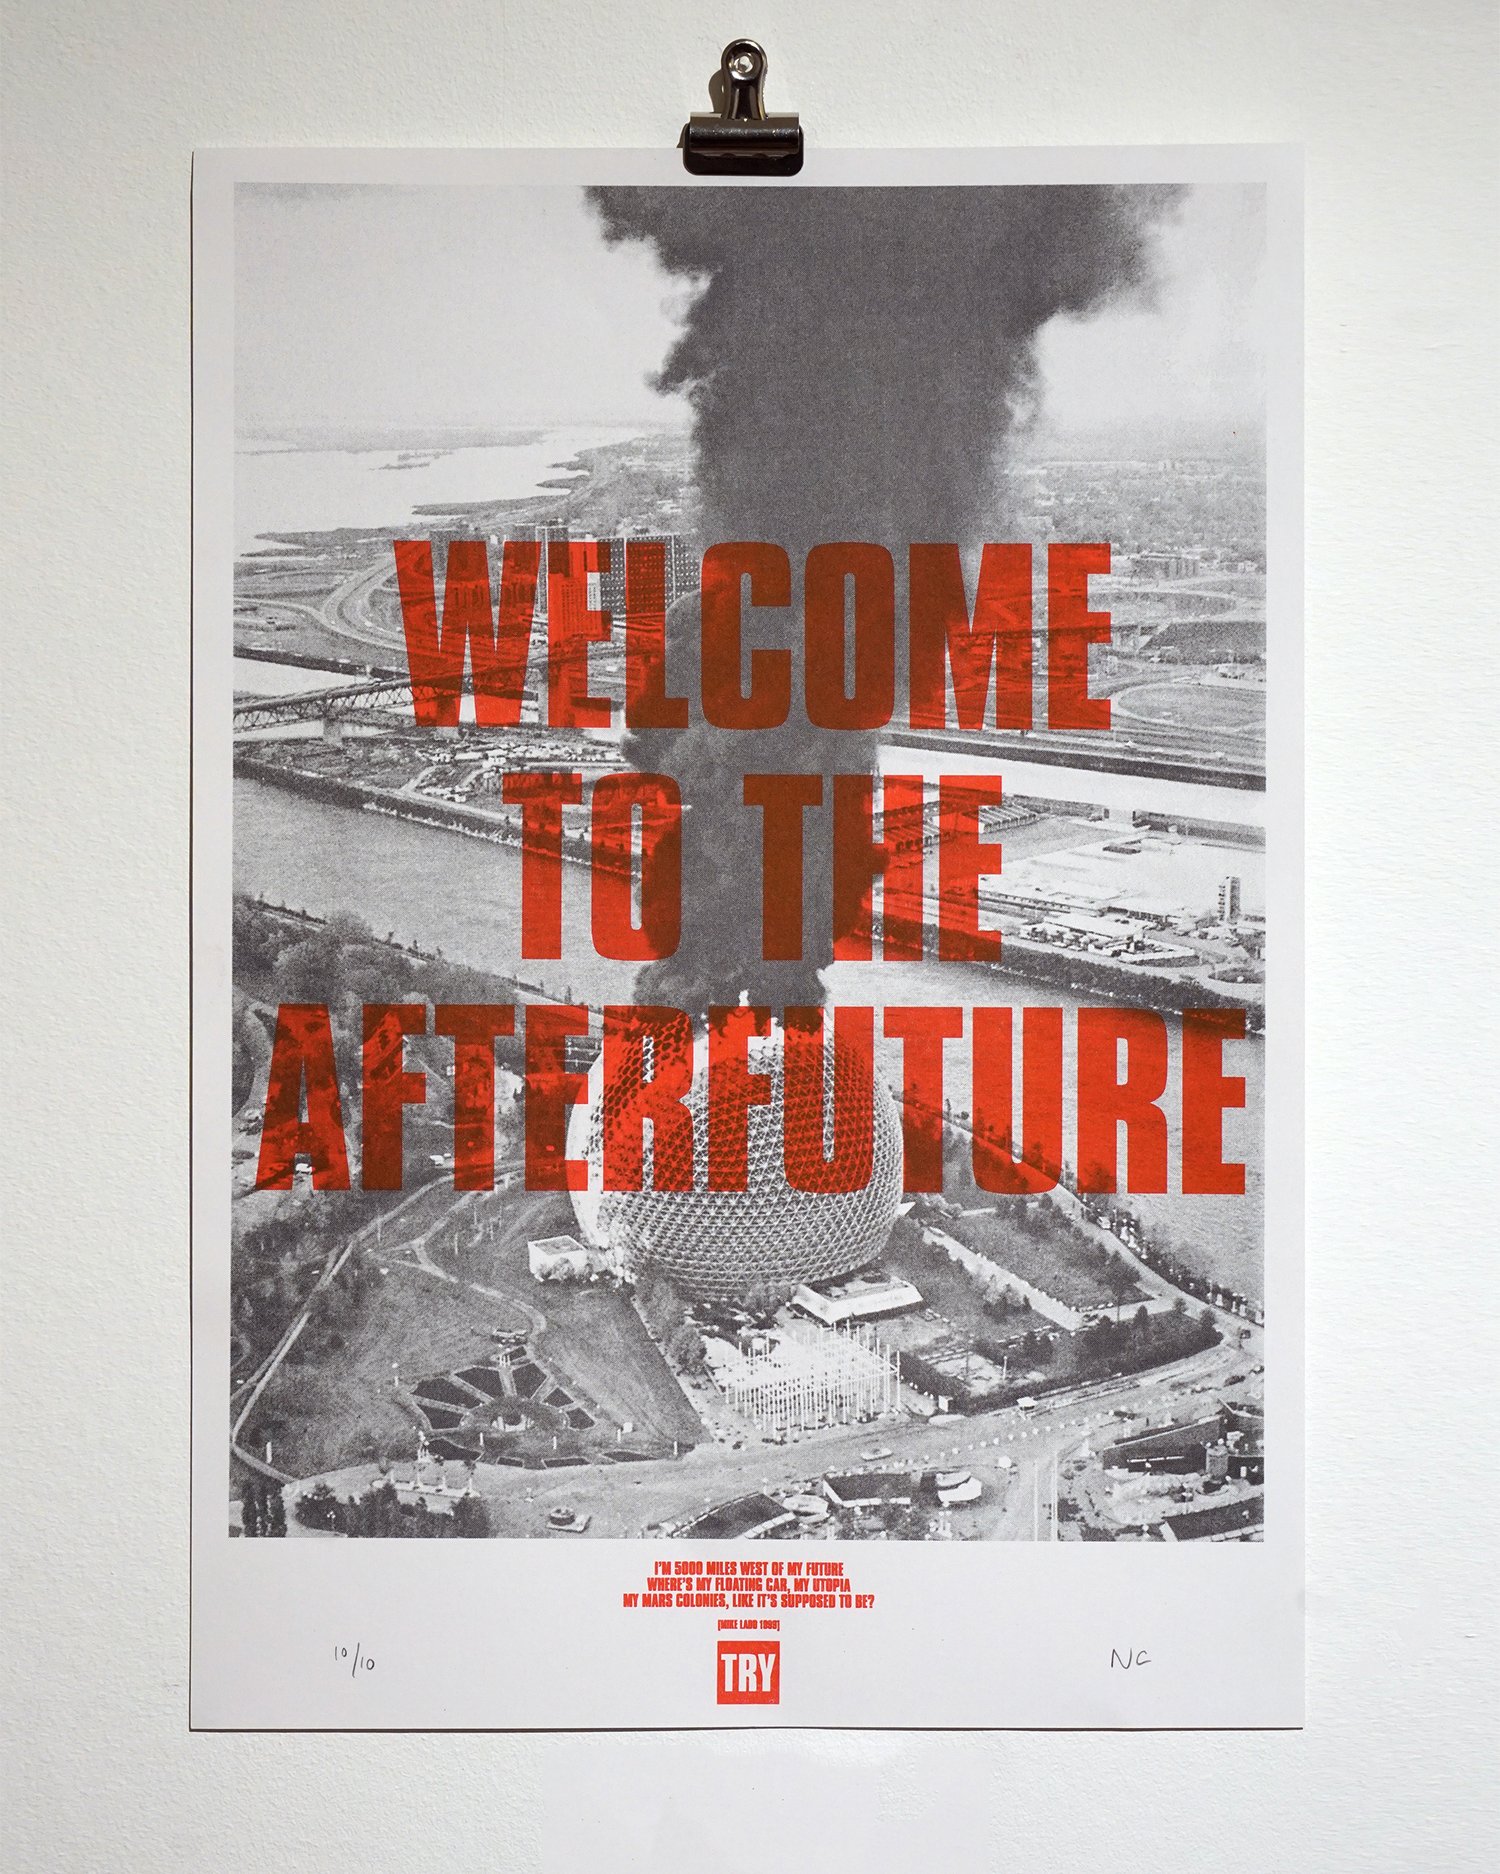 TRY - Welcome To The Afterfuture 02 - RISOGRAPH A3 Print